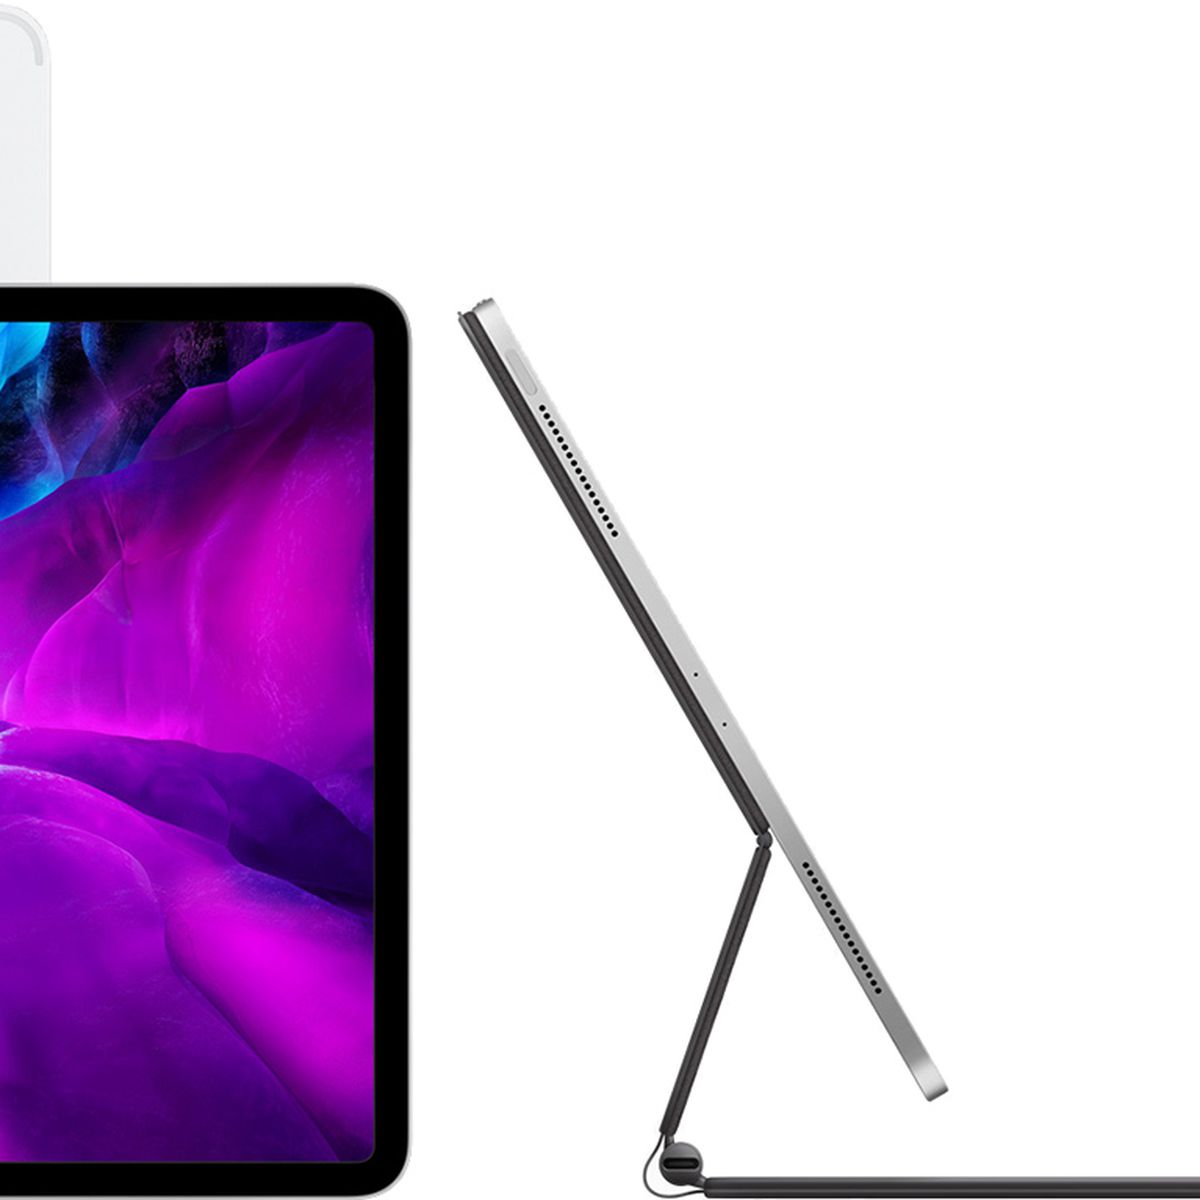 Apple iPad Pro 2021: Does The 2020 Magic Keyboard Fit? Definitive Answer